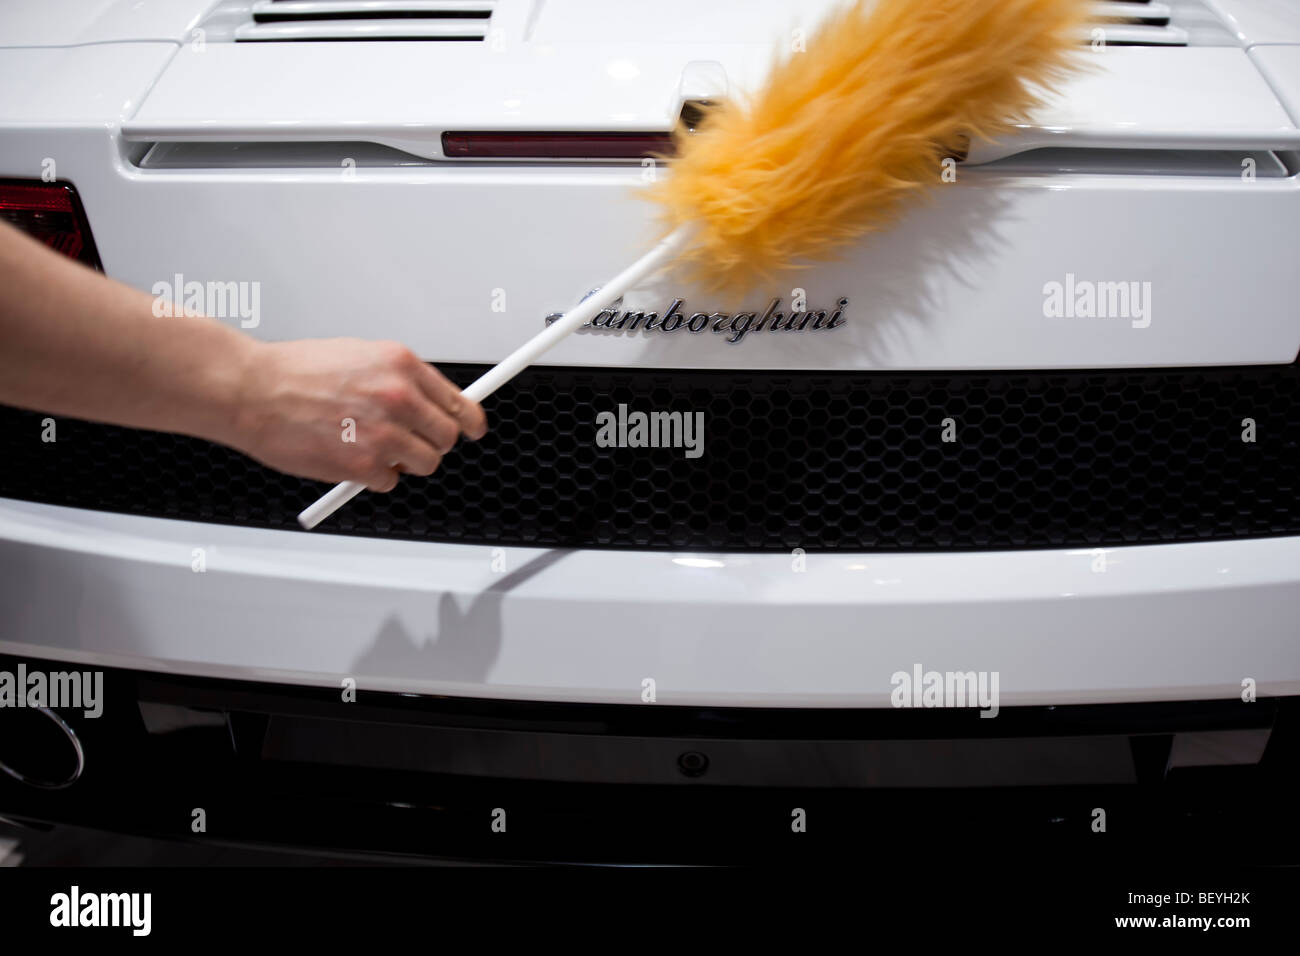 An employee cleans an Lamborghini automobile at Volkswagen AG's annual shareholders' meeting in Hamburg, Germany. Stock Photo